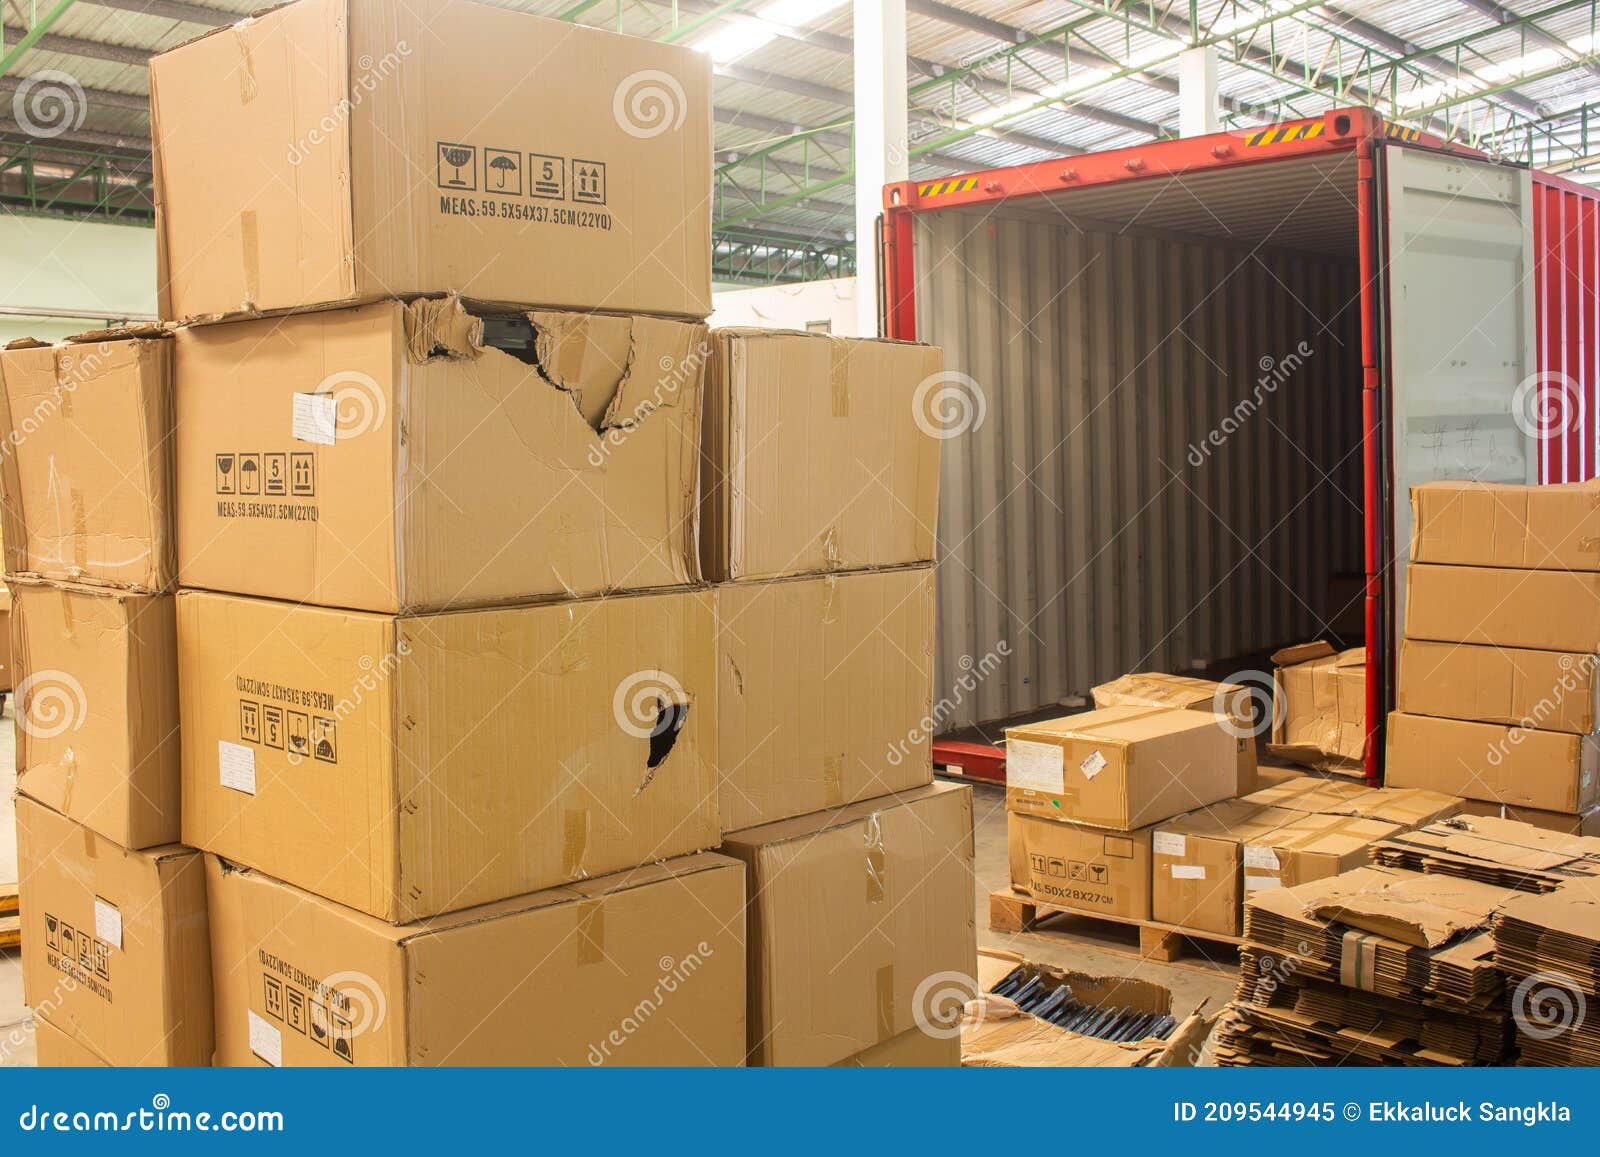 The Unloading Carton from Container and Carton Damage from Loading or  Transport Process Editorial Image - Image of object, package: 209544945